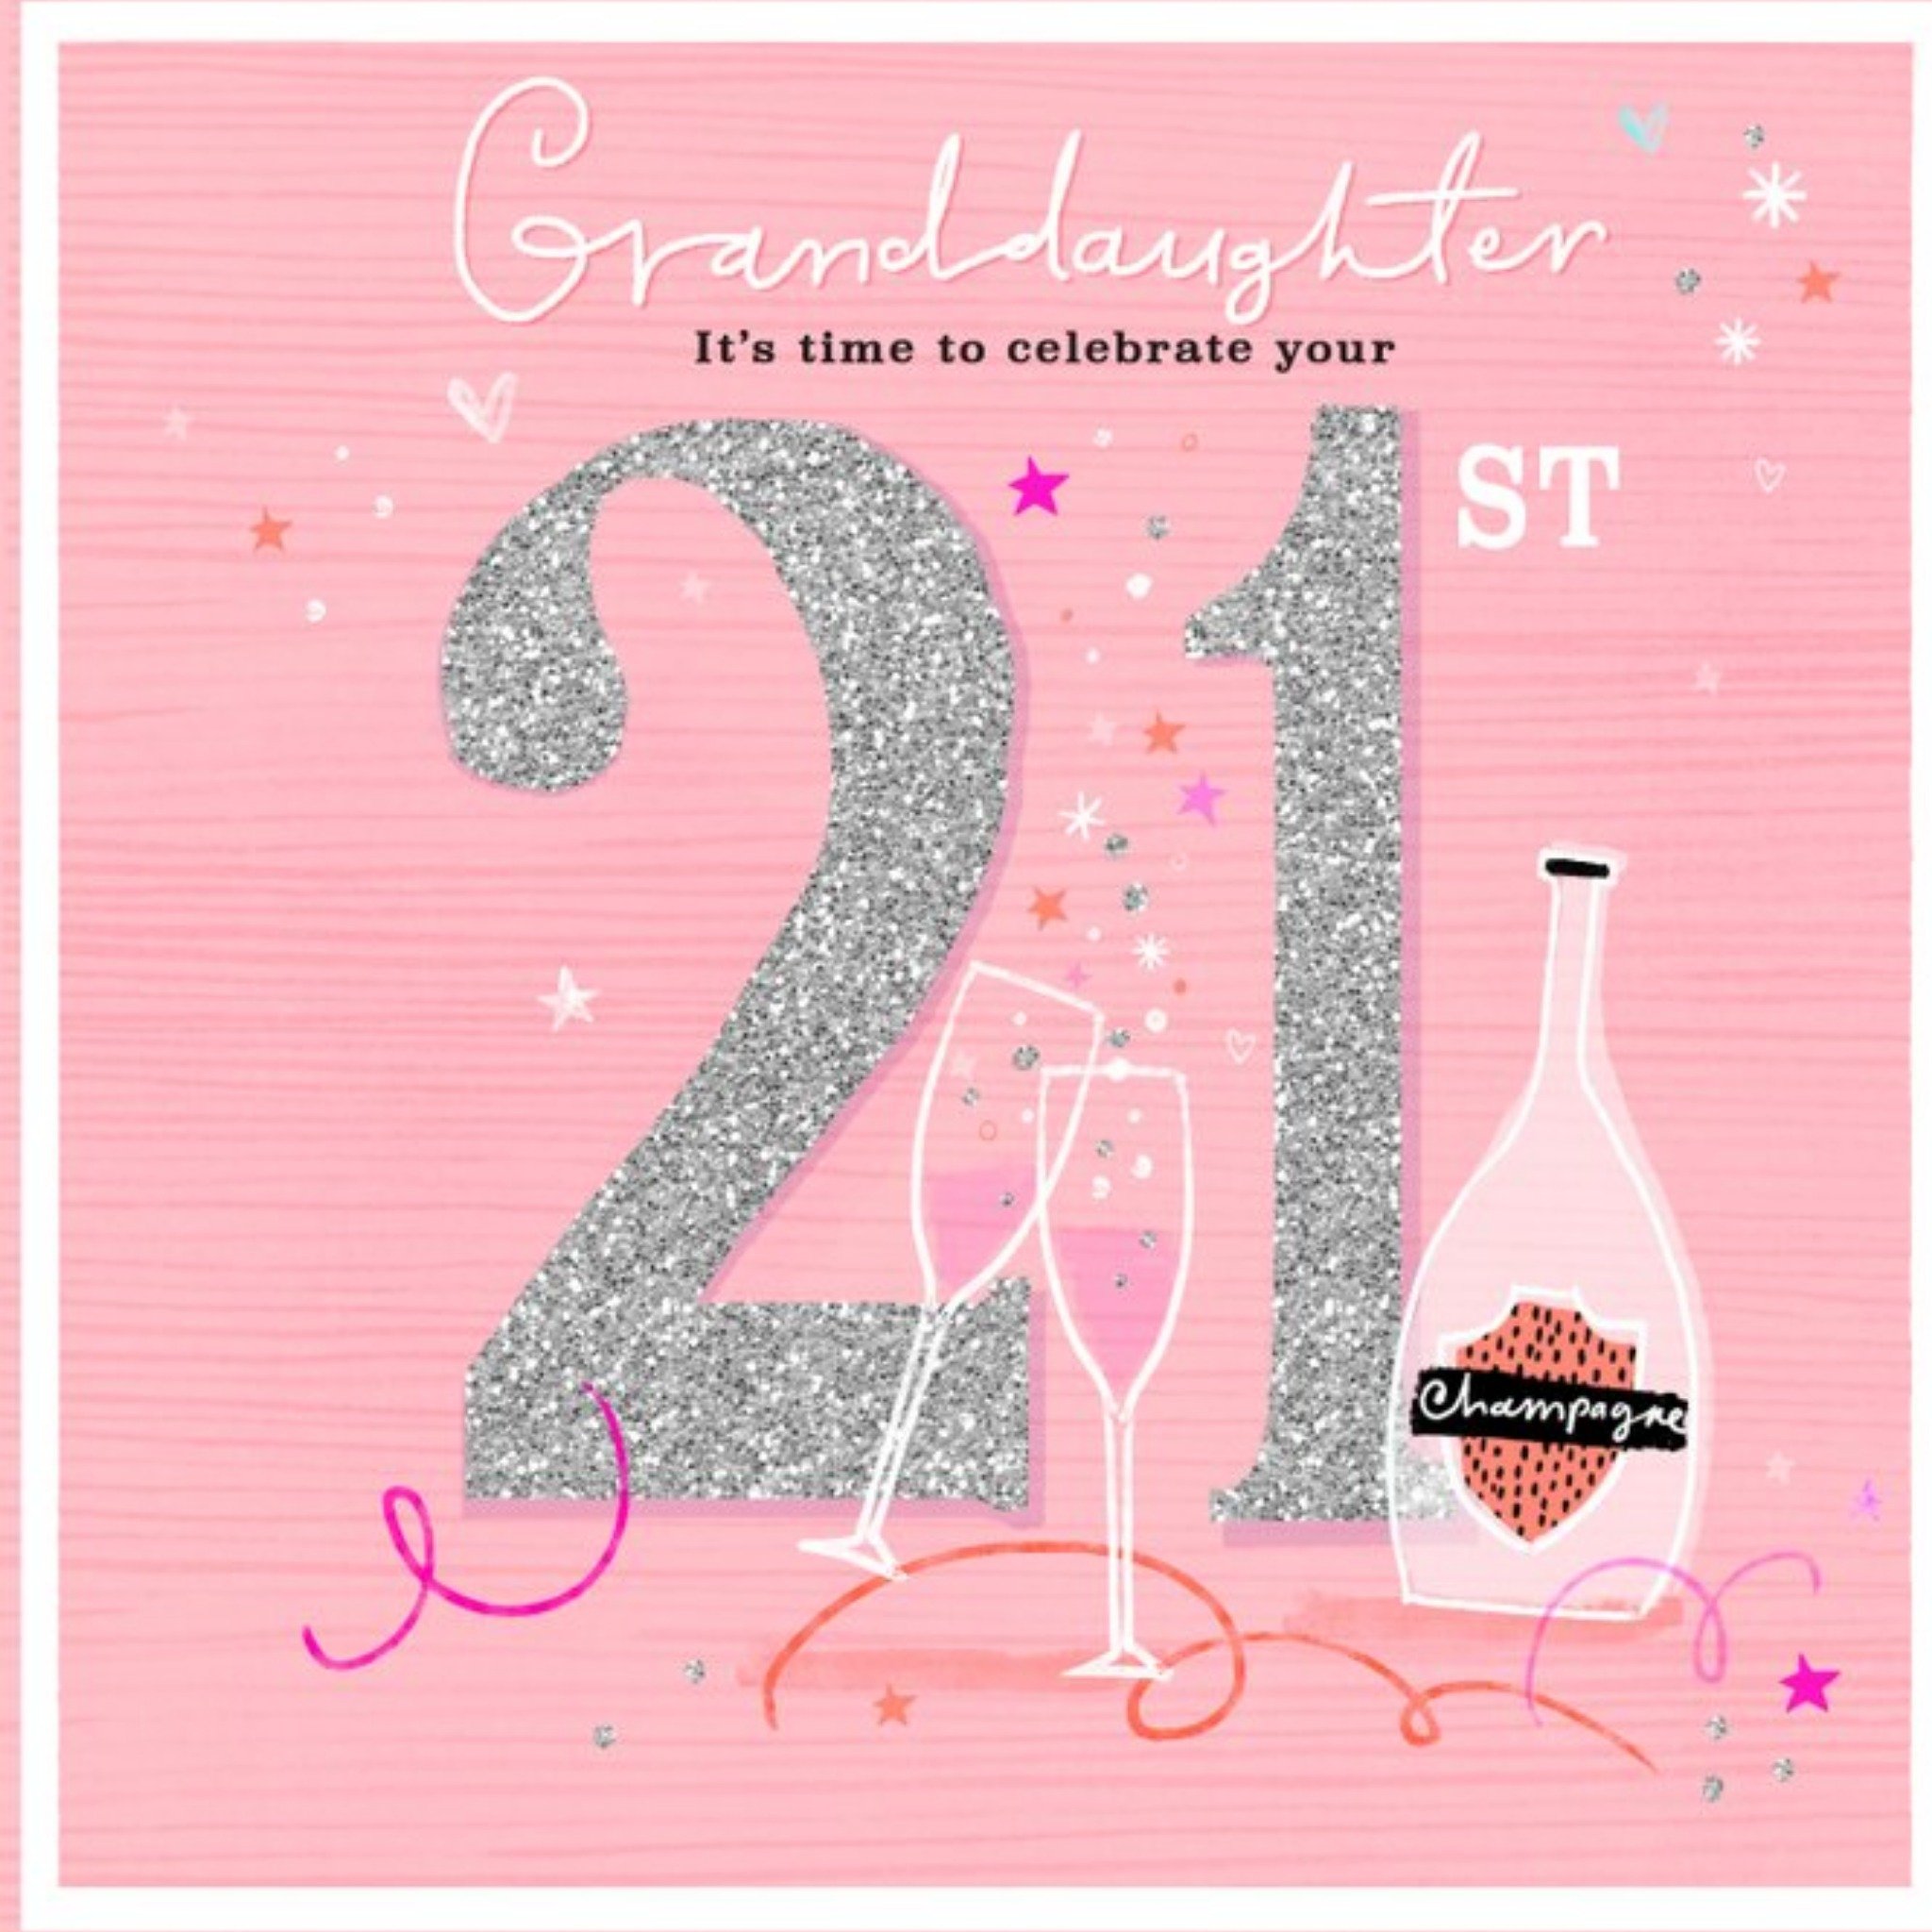 Moonpig Typographic Design Drinks Champagne Granddaughter 21st Birthday Card, Square